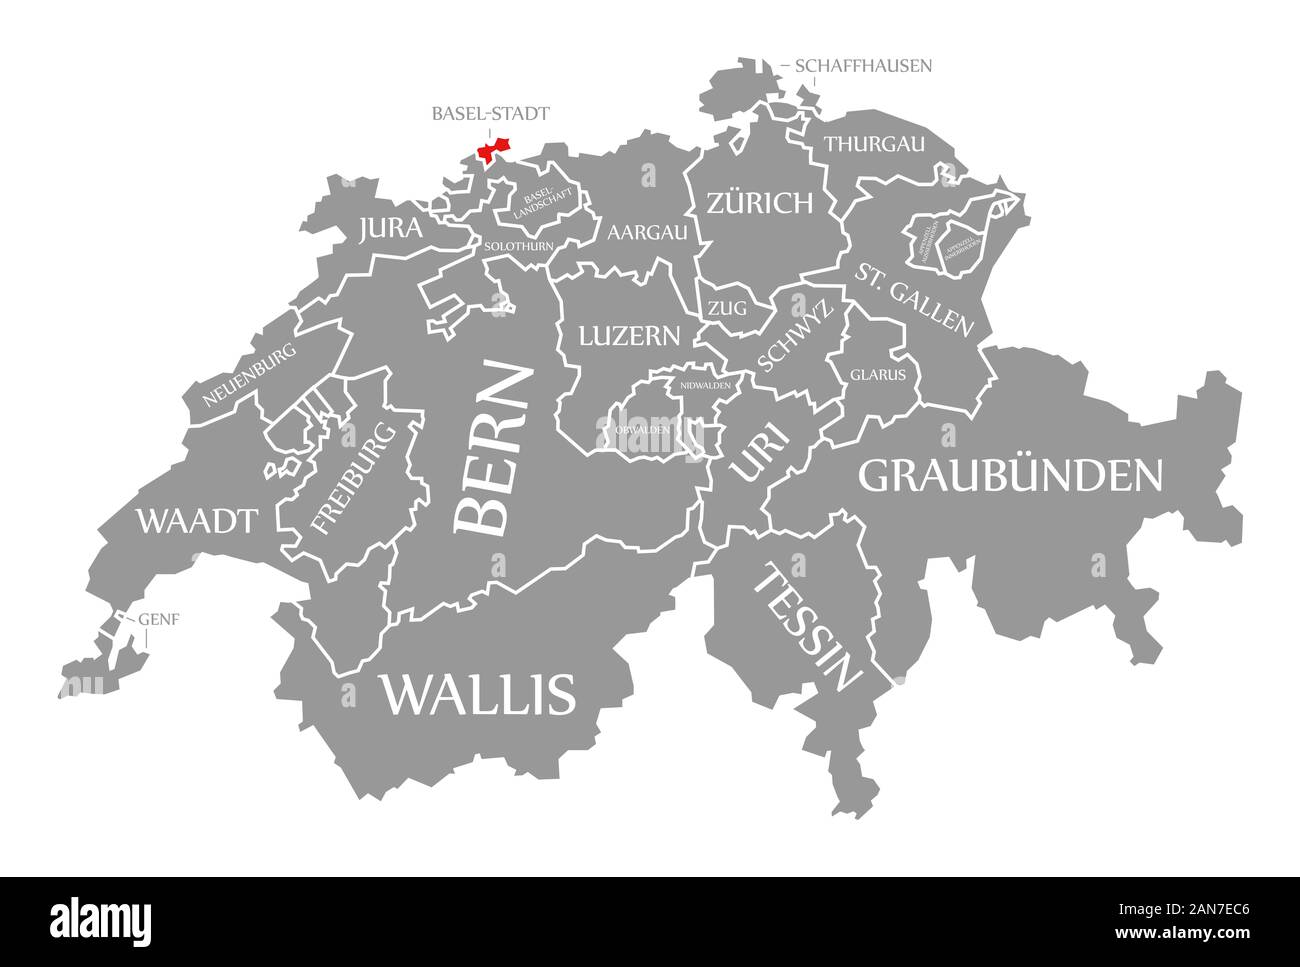 Basel Stadt red highlighted in map of Switzerland Stock Photo